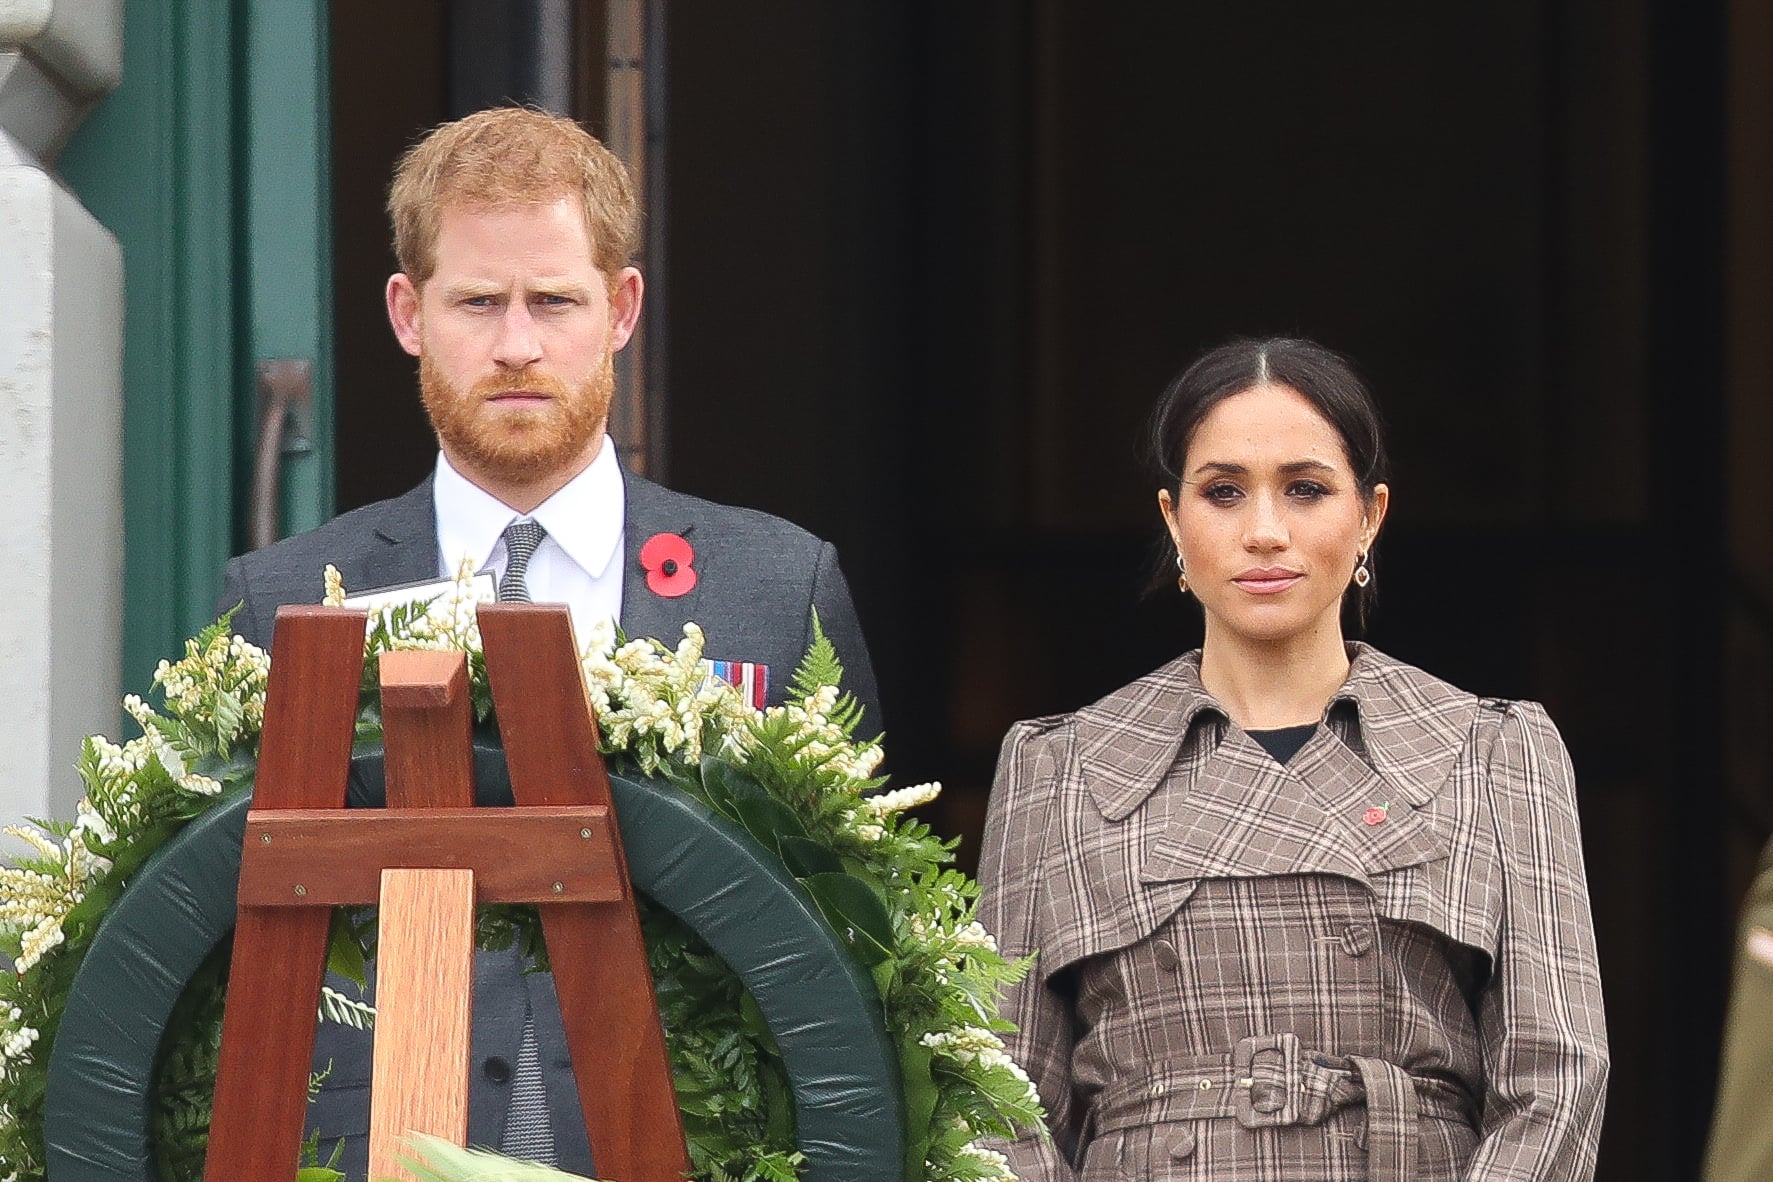 WELLINGTON, NEW ZEALAND - OCTOBER 28:  Prince Harry, Duke of Sussex and Meghan, Duchess of Sussex Laying Wreath at the National War Memorial on October 28, 2018 in Wellington, New Zealand. The Duke and Duchess of Sussex are on their official 16-day Autumn tour visiting cities in Australia, Fiji, Tonga and New Zealand.  (Photo by Chris Jackson/Getty Images)